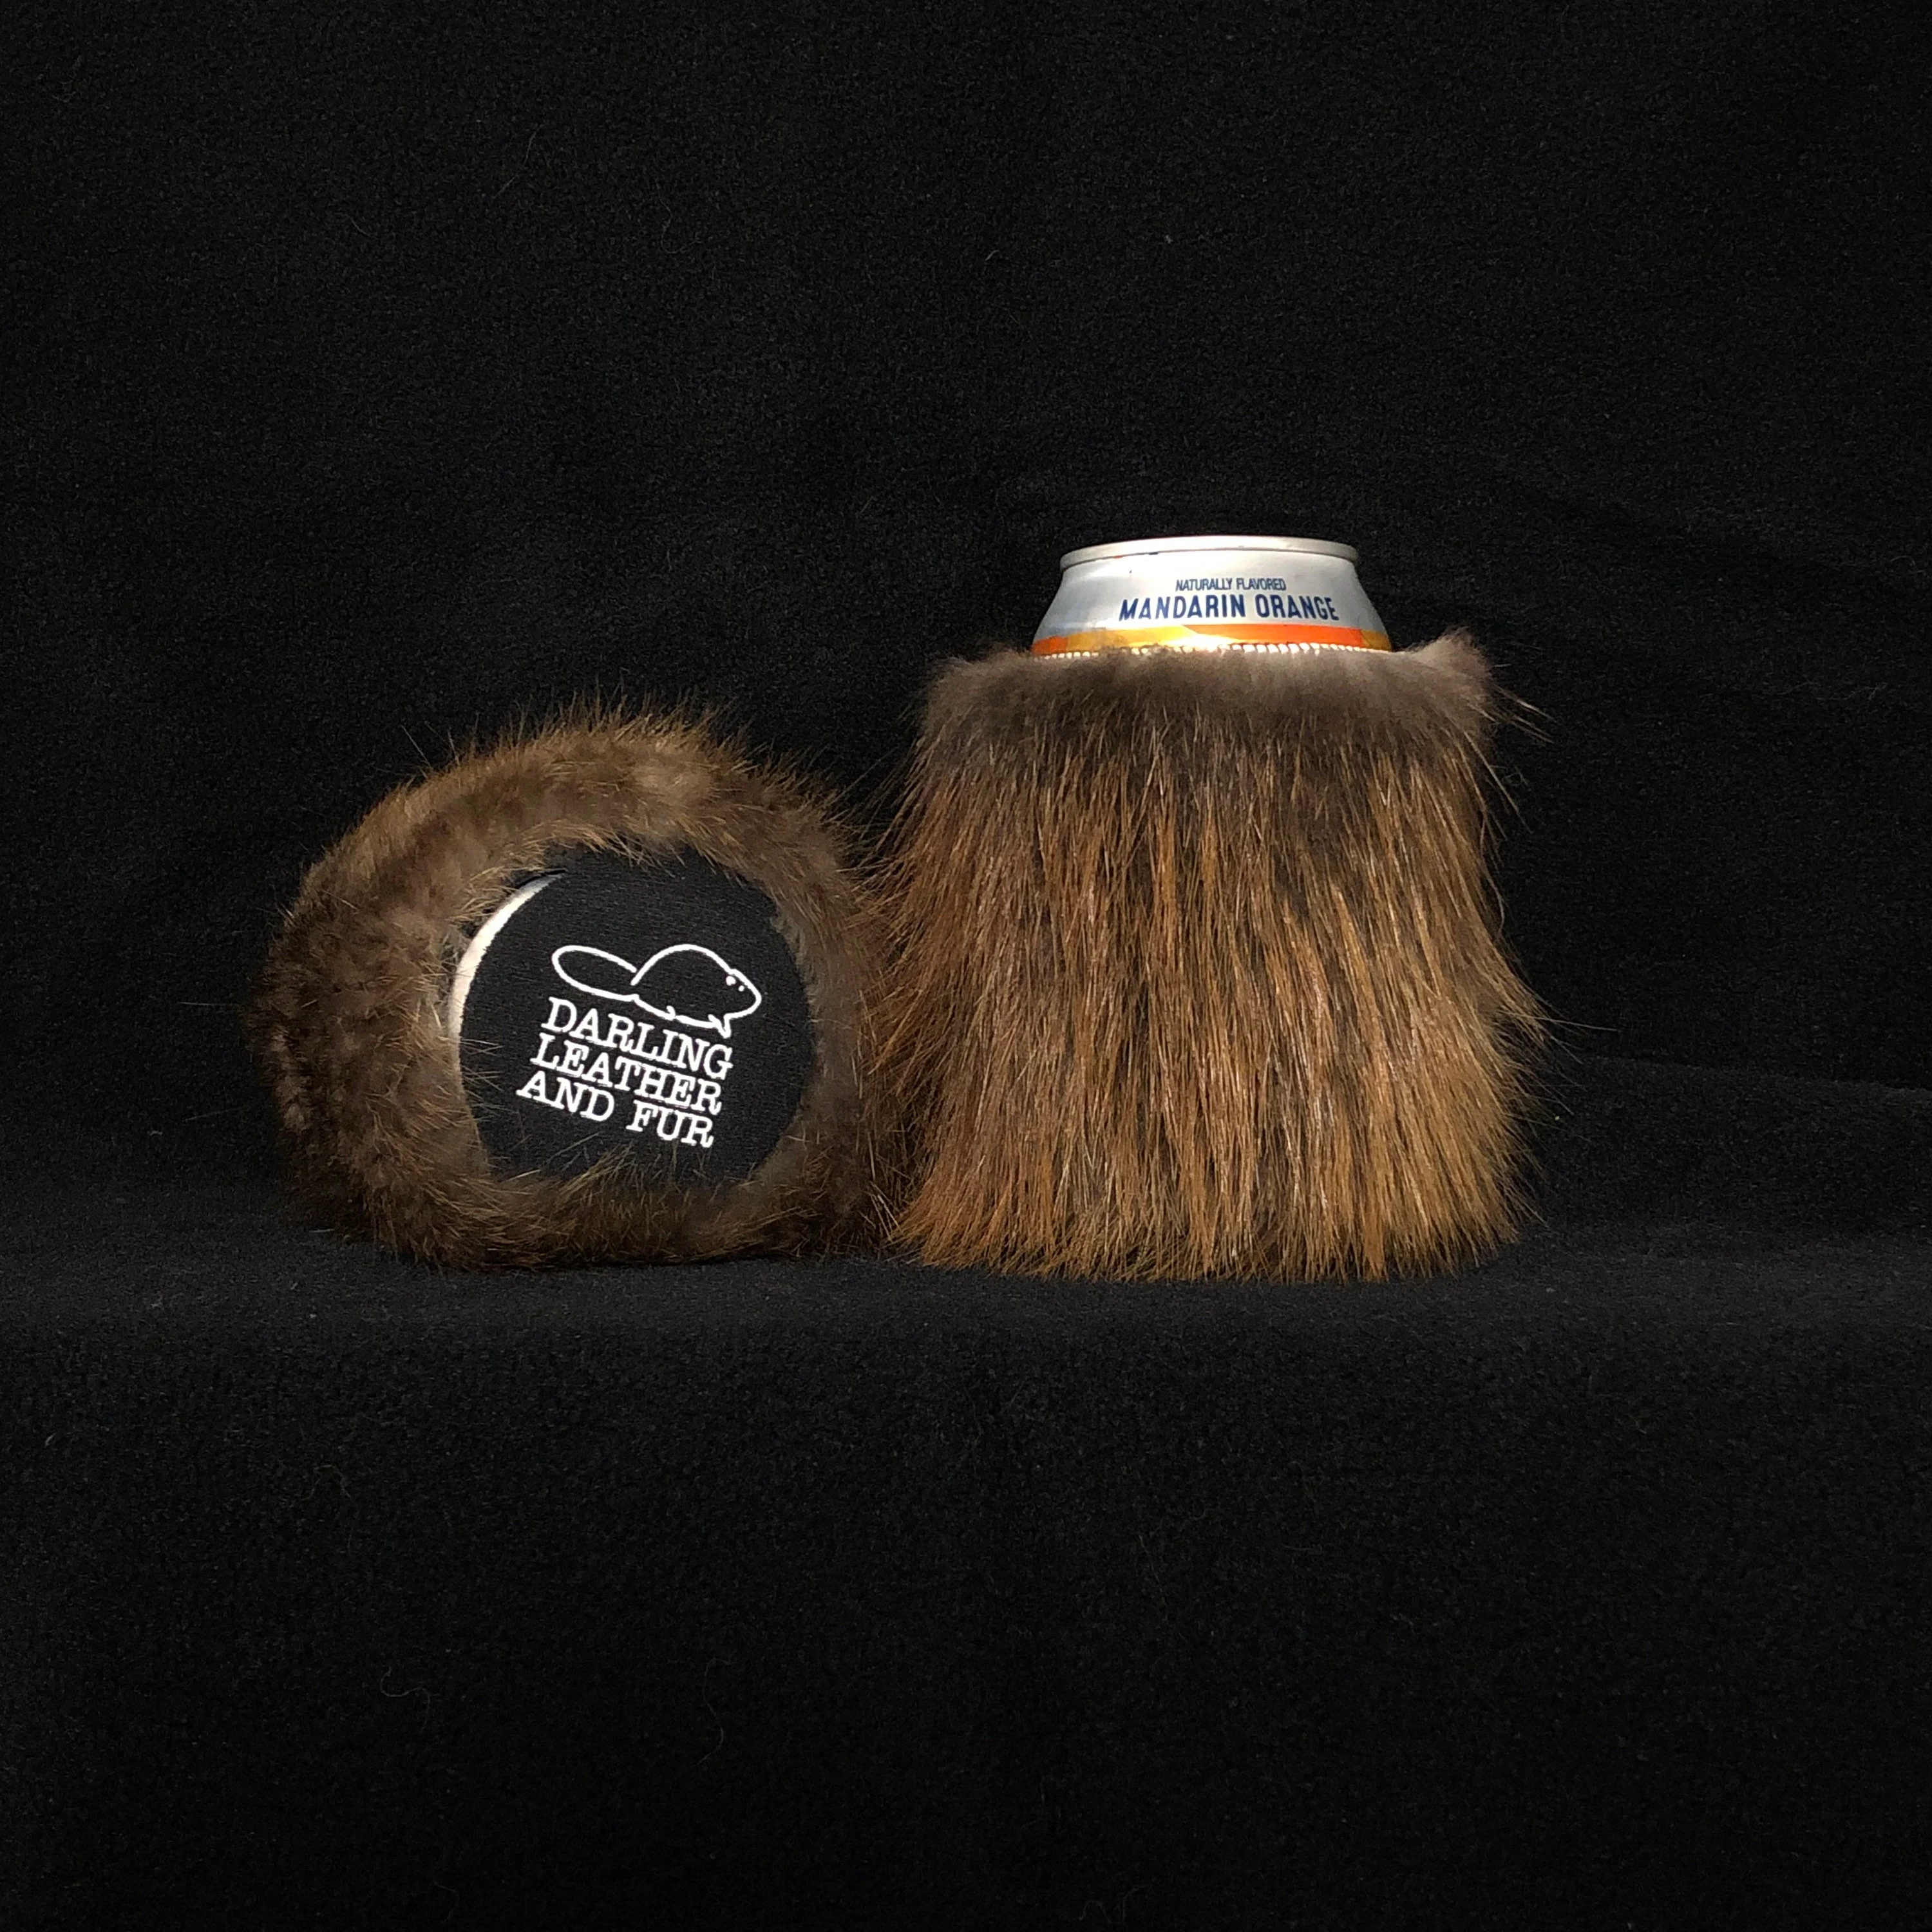 Beaver Fur Can And Bottle Cooler/Cozy With Pink Neoprene Insert  FREESHIPPING!